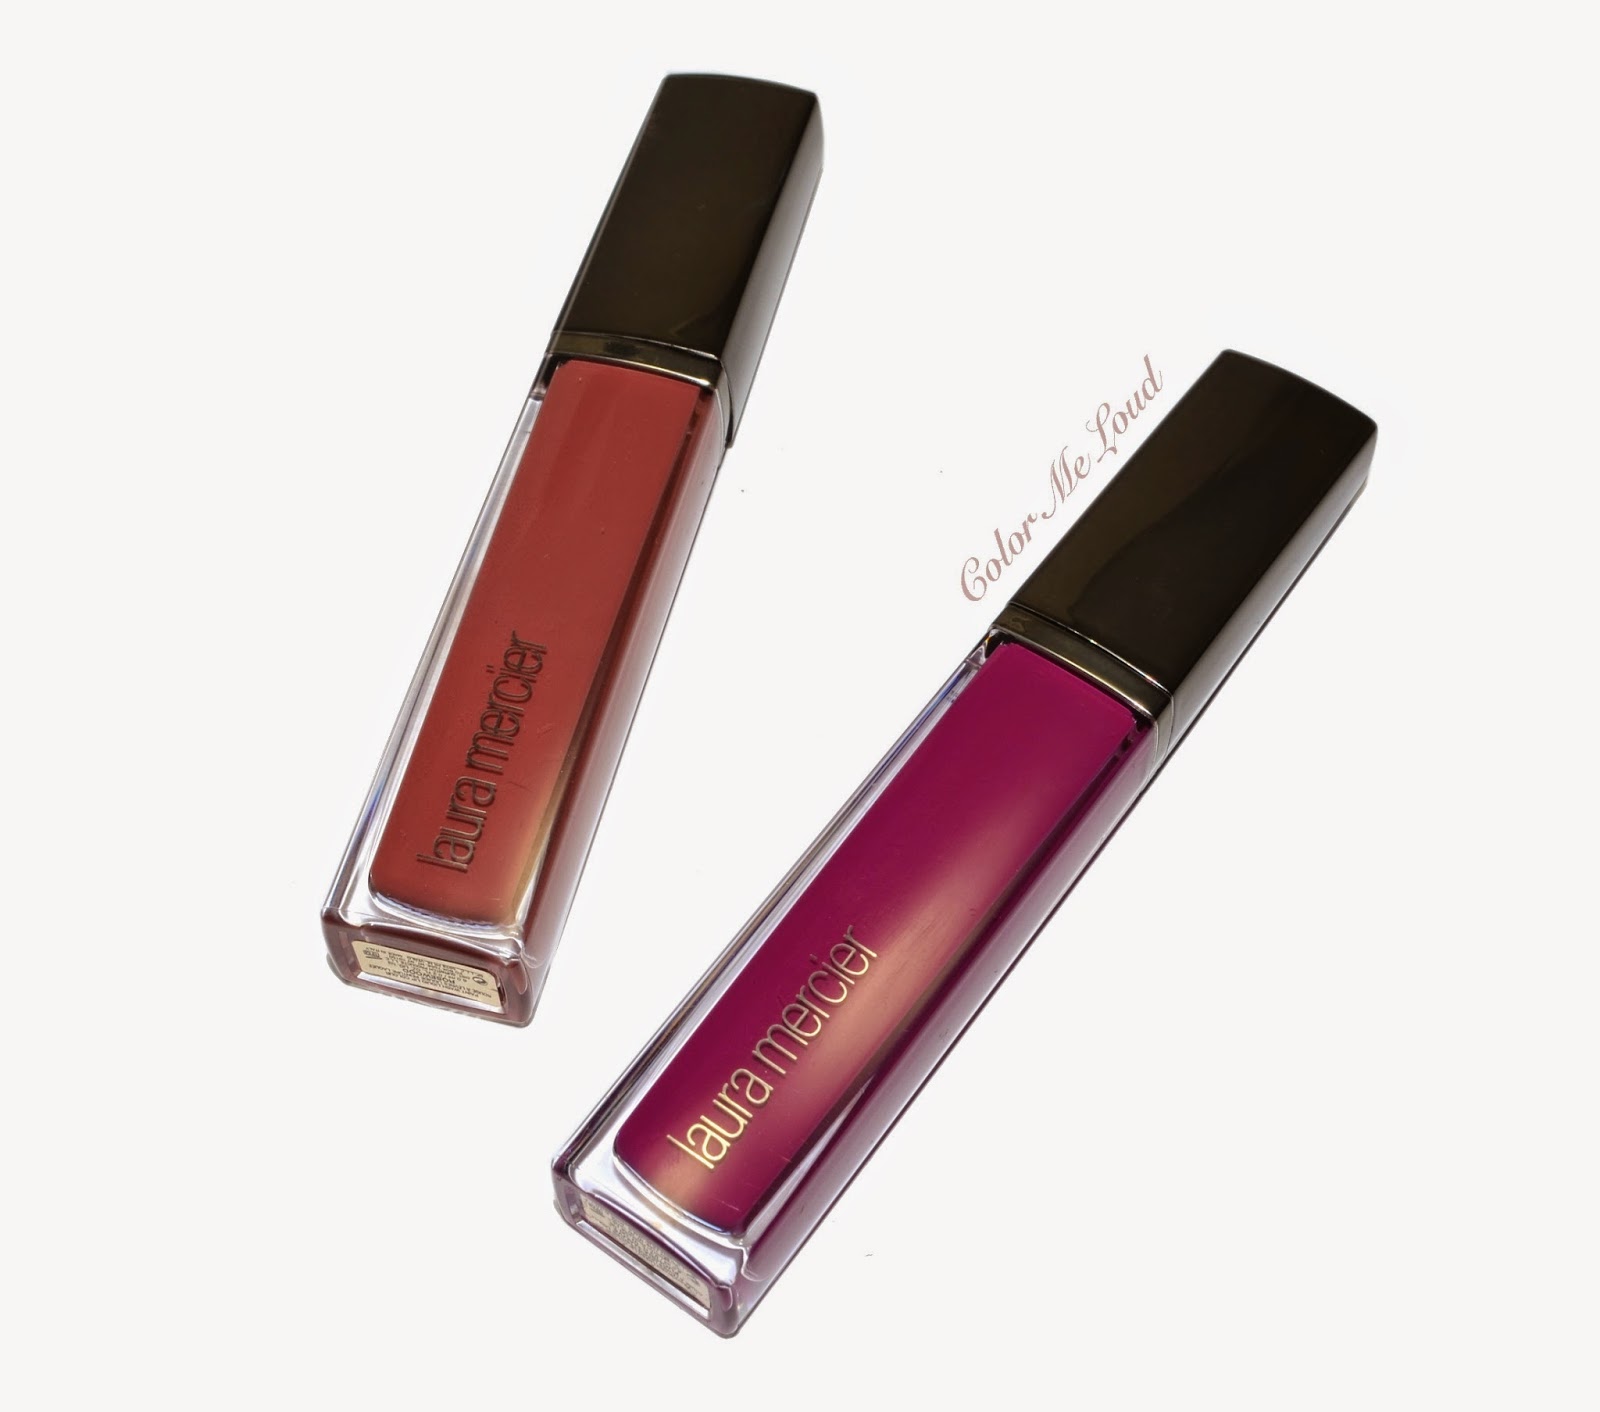 Stila Stay All Day Liquid Lipstick in Dolce - Review